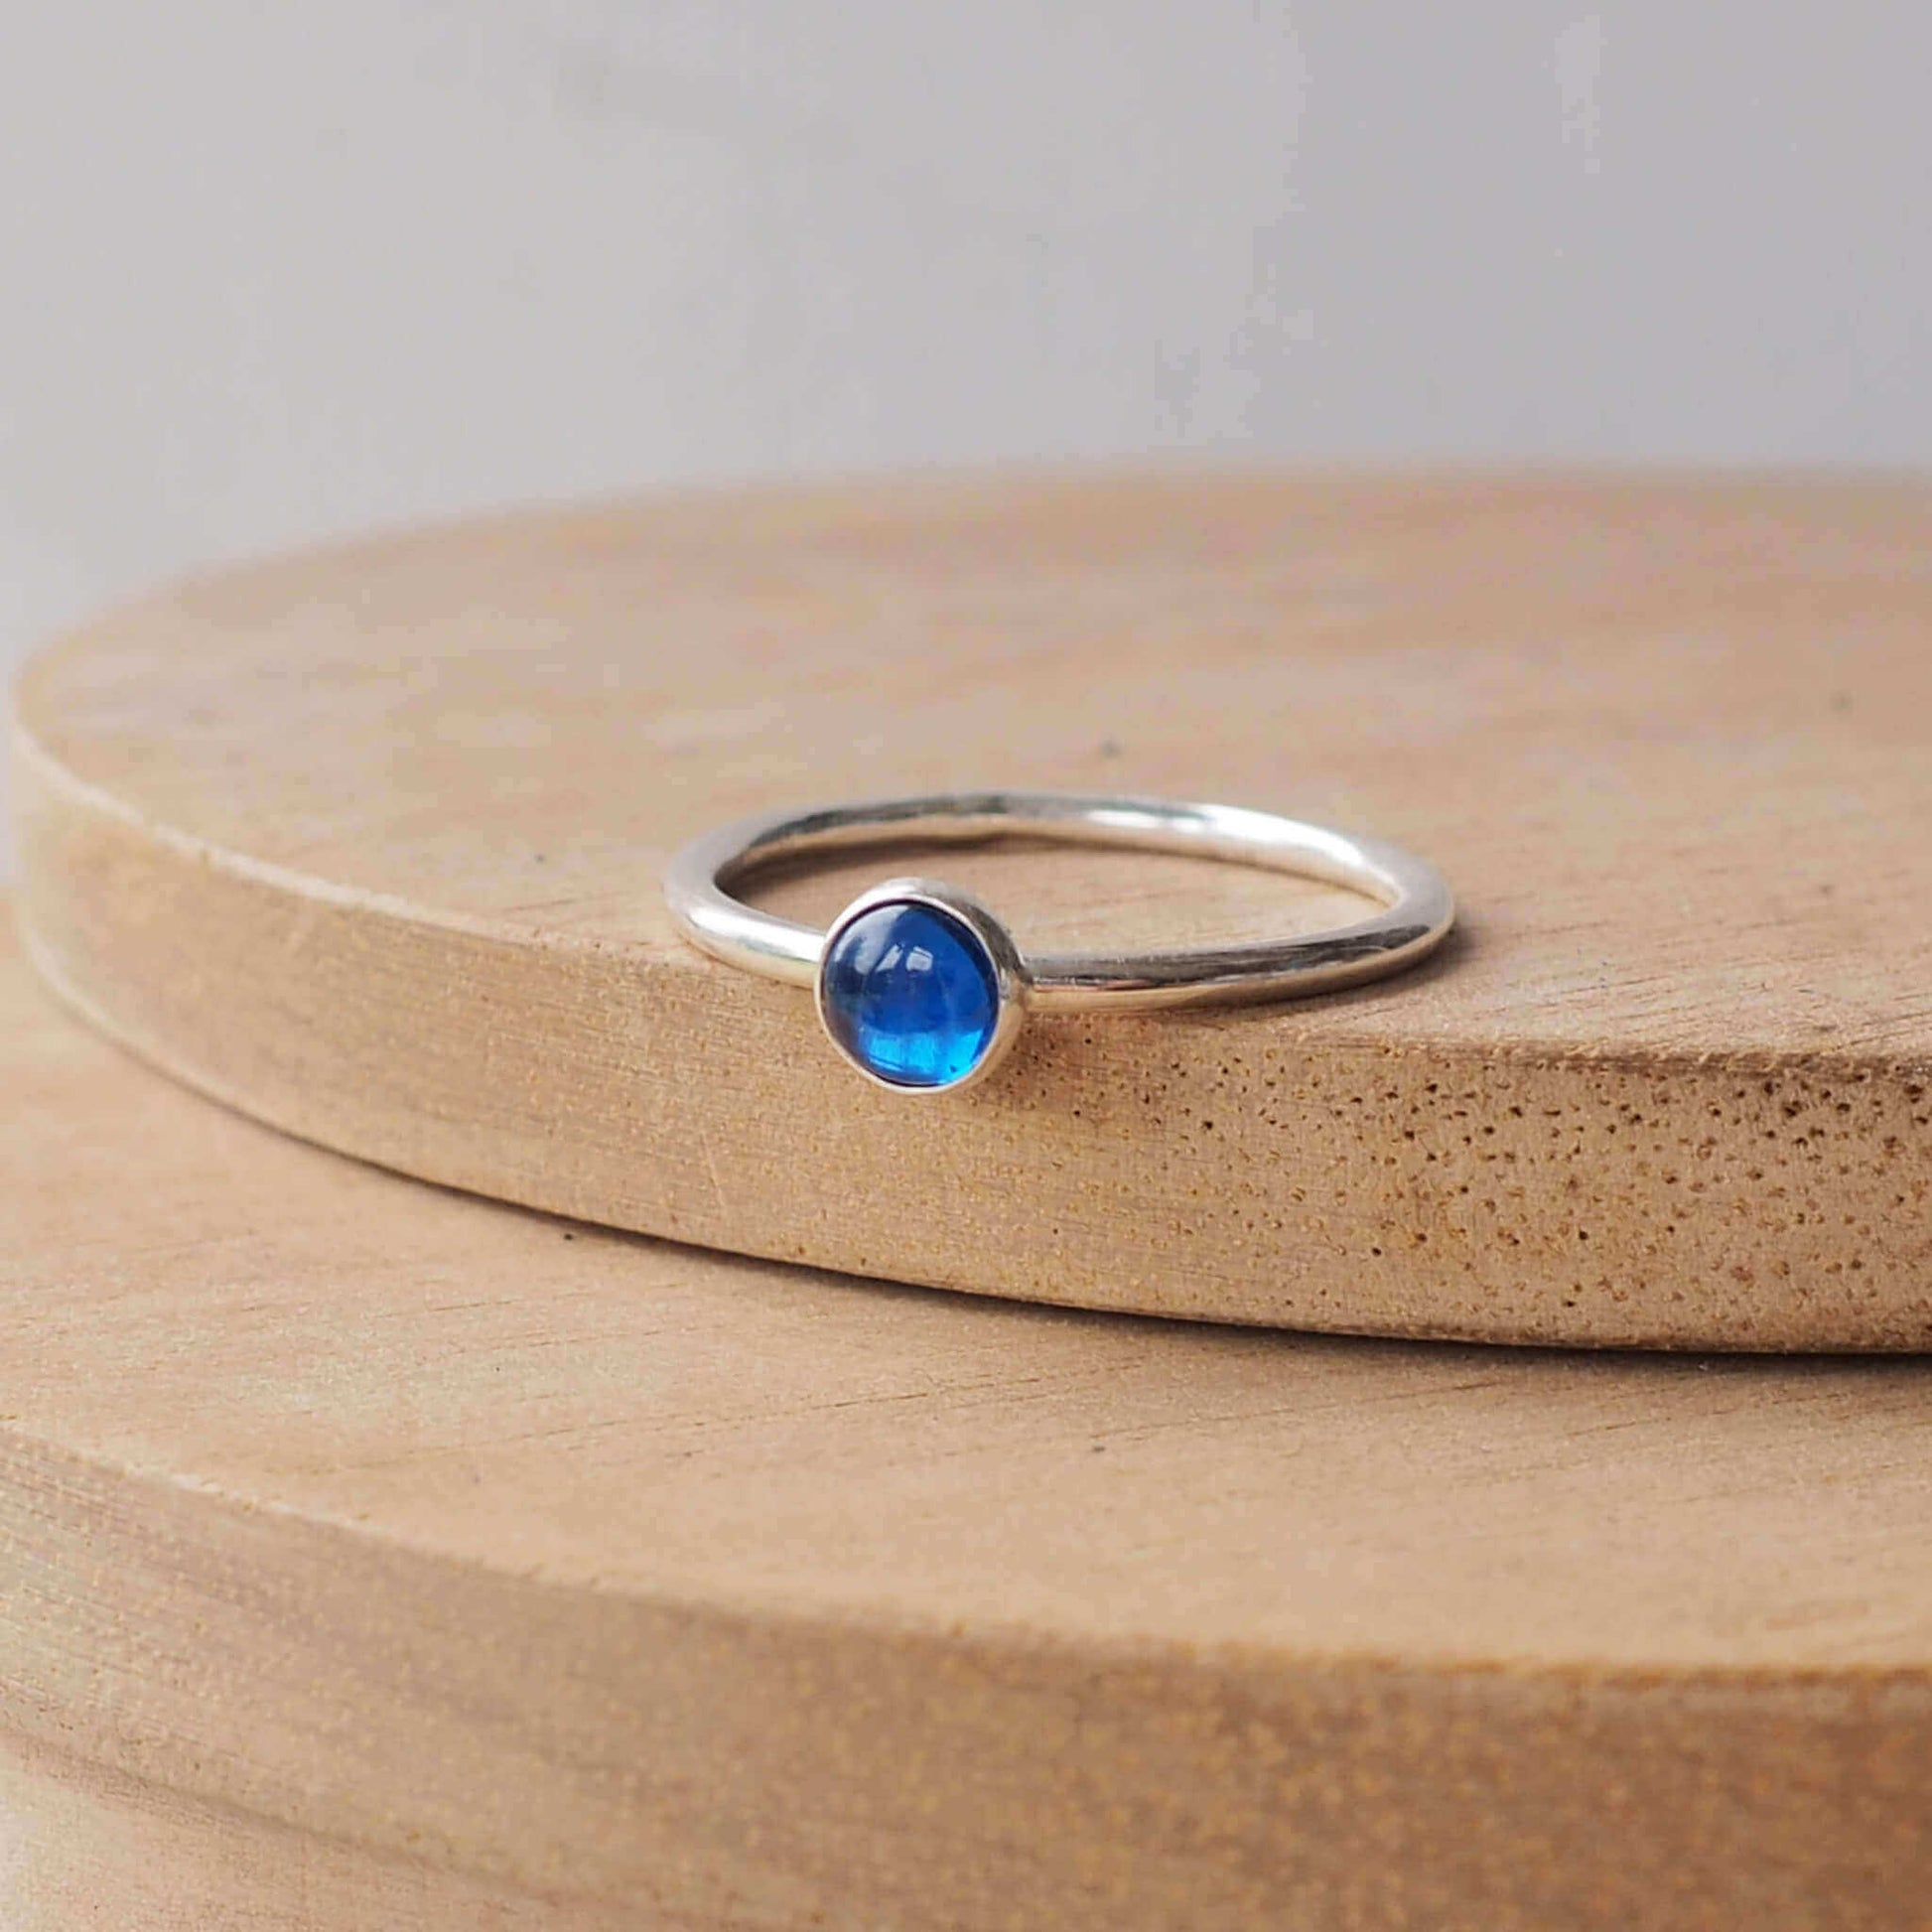 Silver Ring with a round gemstone in a simple style. The gem is a 5mm round lab sapphire cabochon in a bright primary blue. Handmade by maram jewellery in Scotland